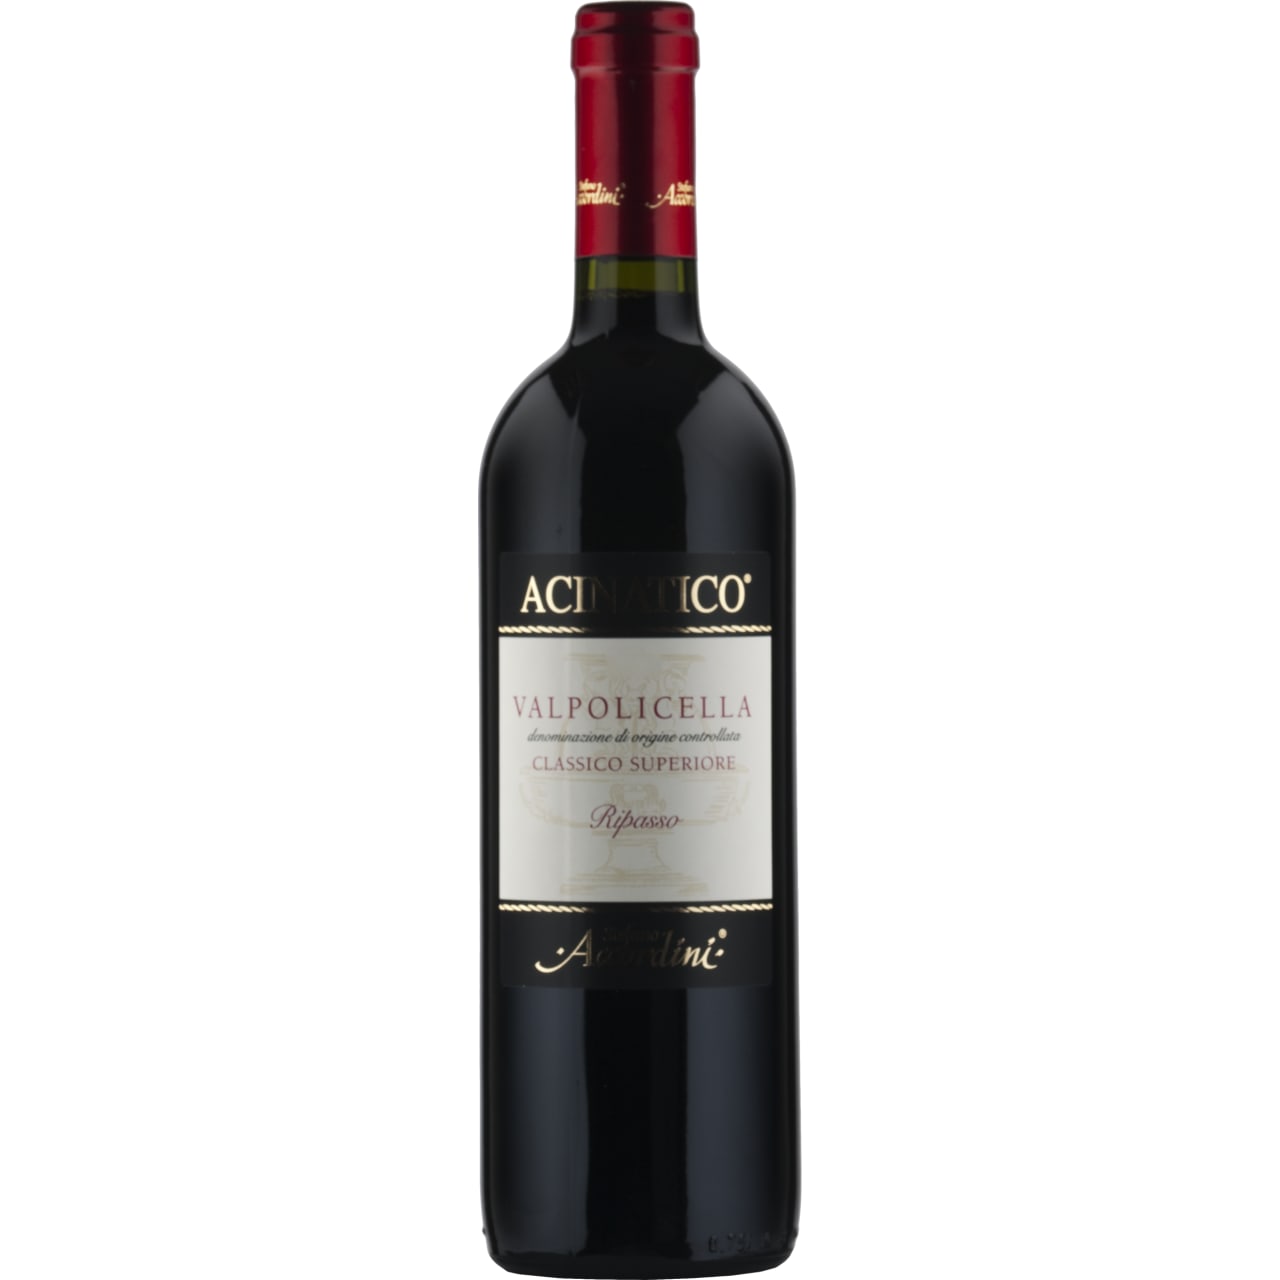 A full-bodied, warming red with a bouquet of red cherries, spice and vanilla.